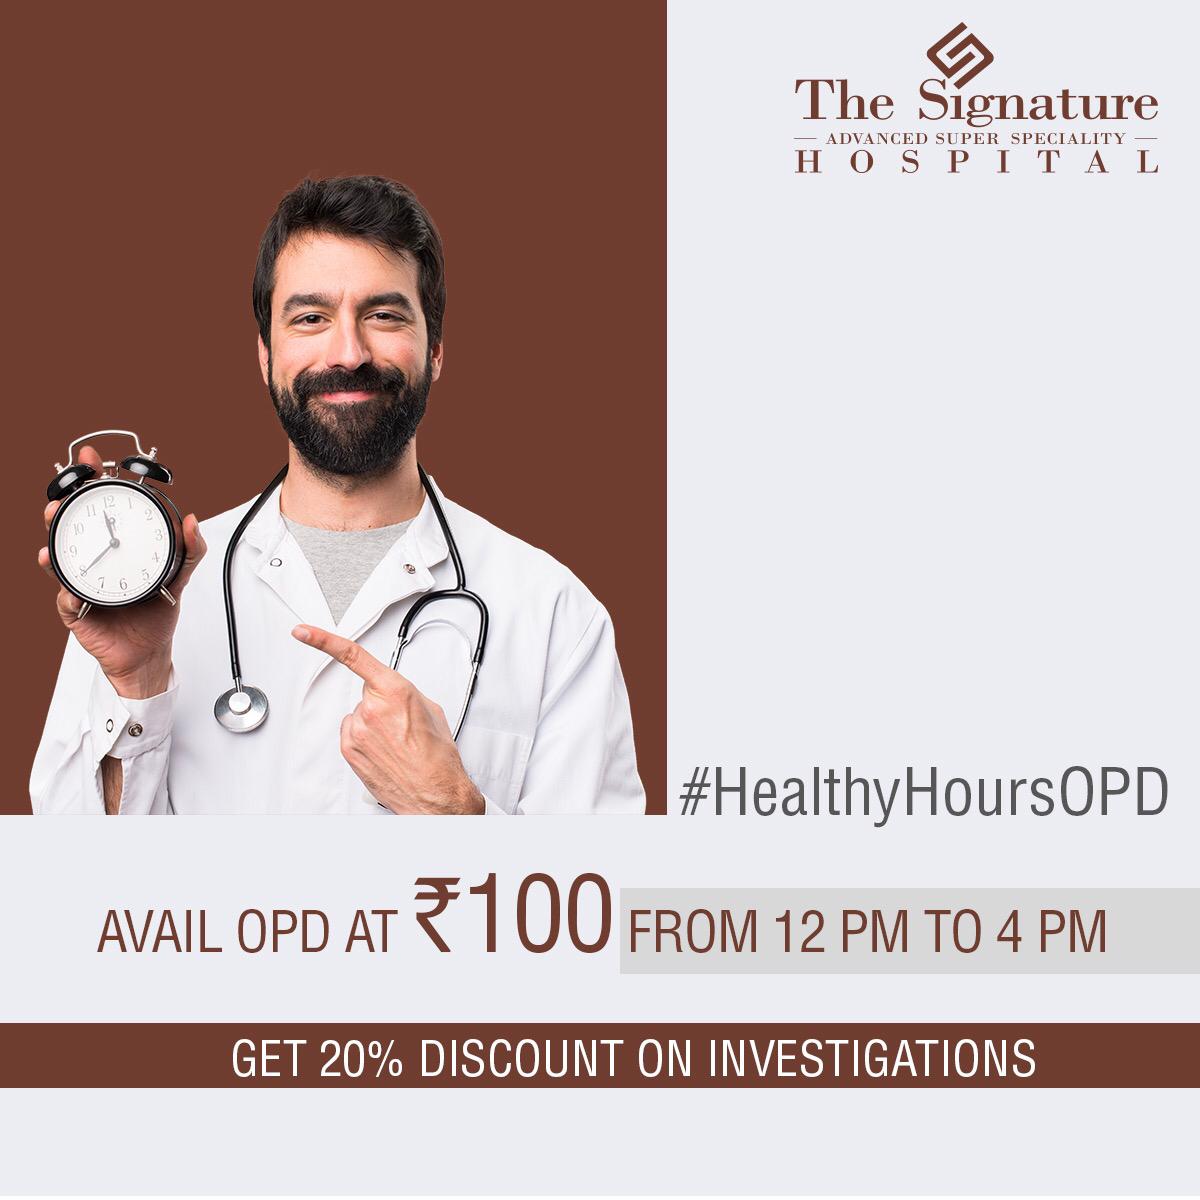 Healthy Hours at Signature Hospital!